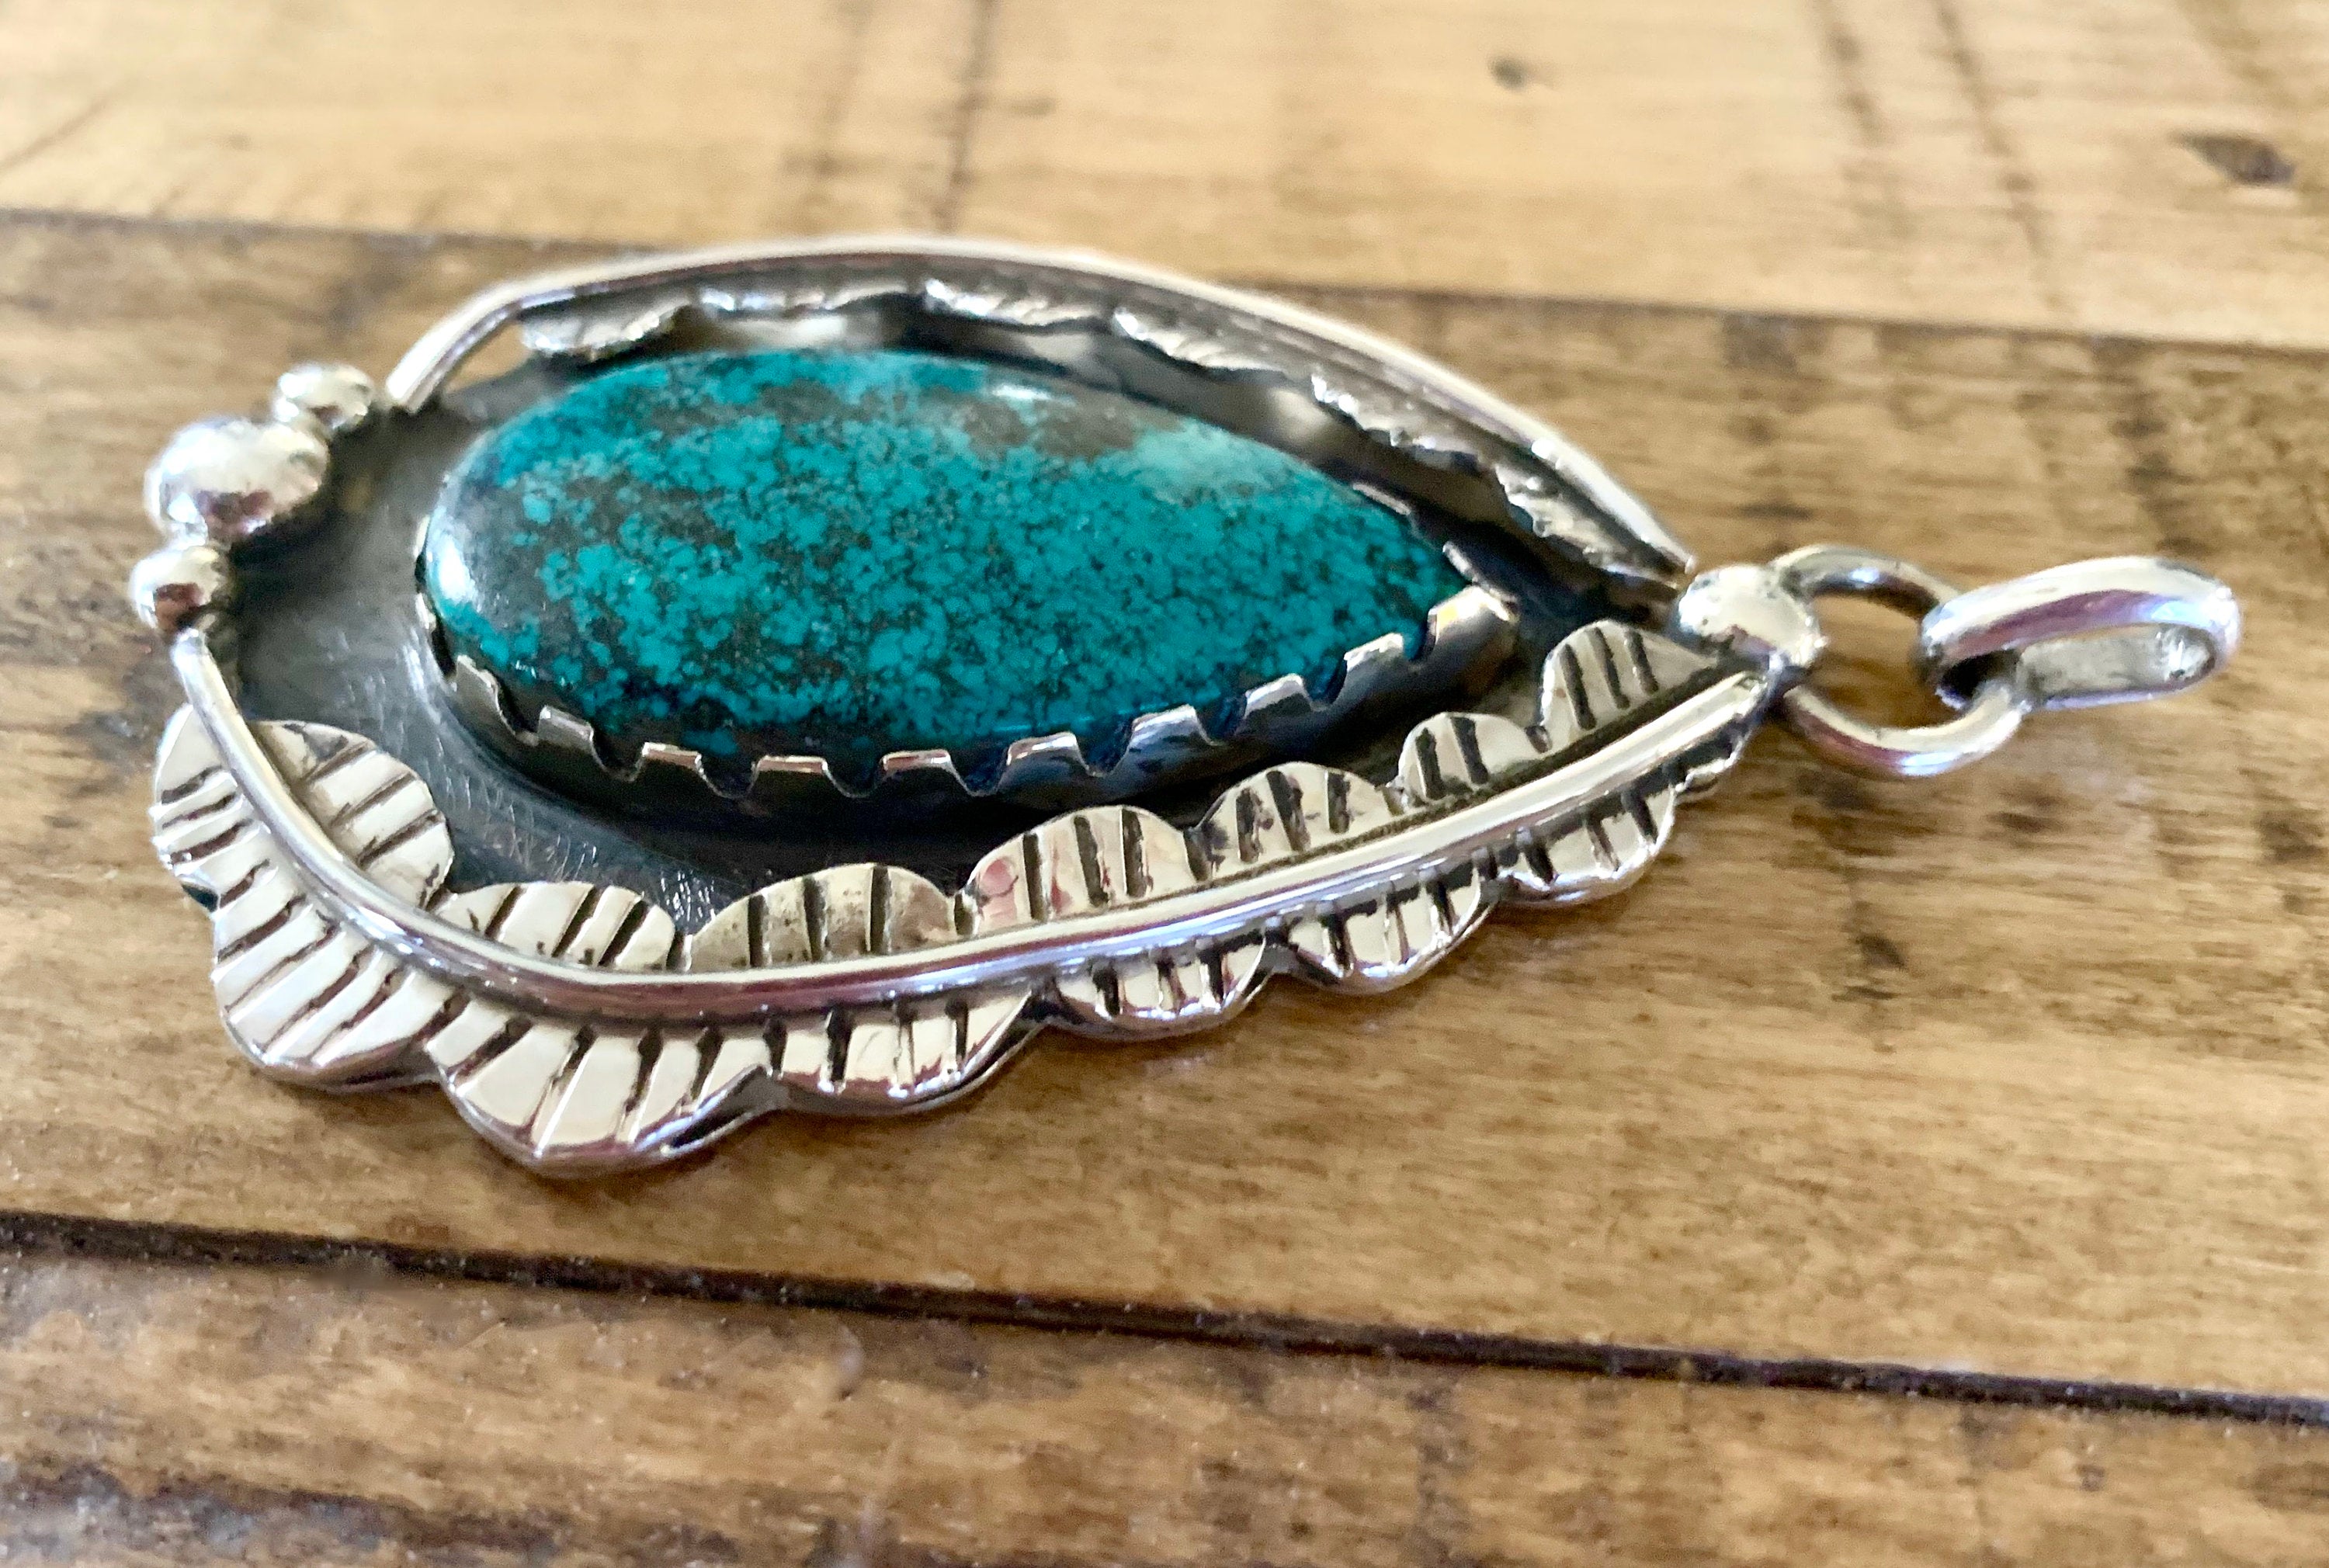 Muheeka Sterling Silver TEARDROP TURQUOISE PENDANT, Blue Green Turquoise with Feather Motifs and Flower, Handmade by Bob Summers Silversmith